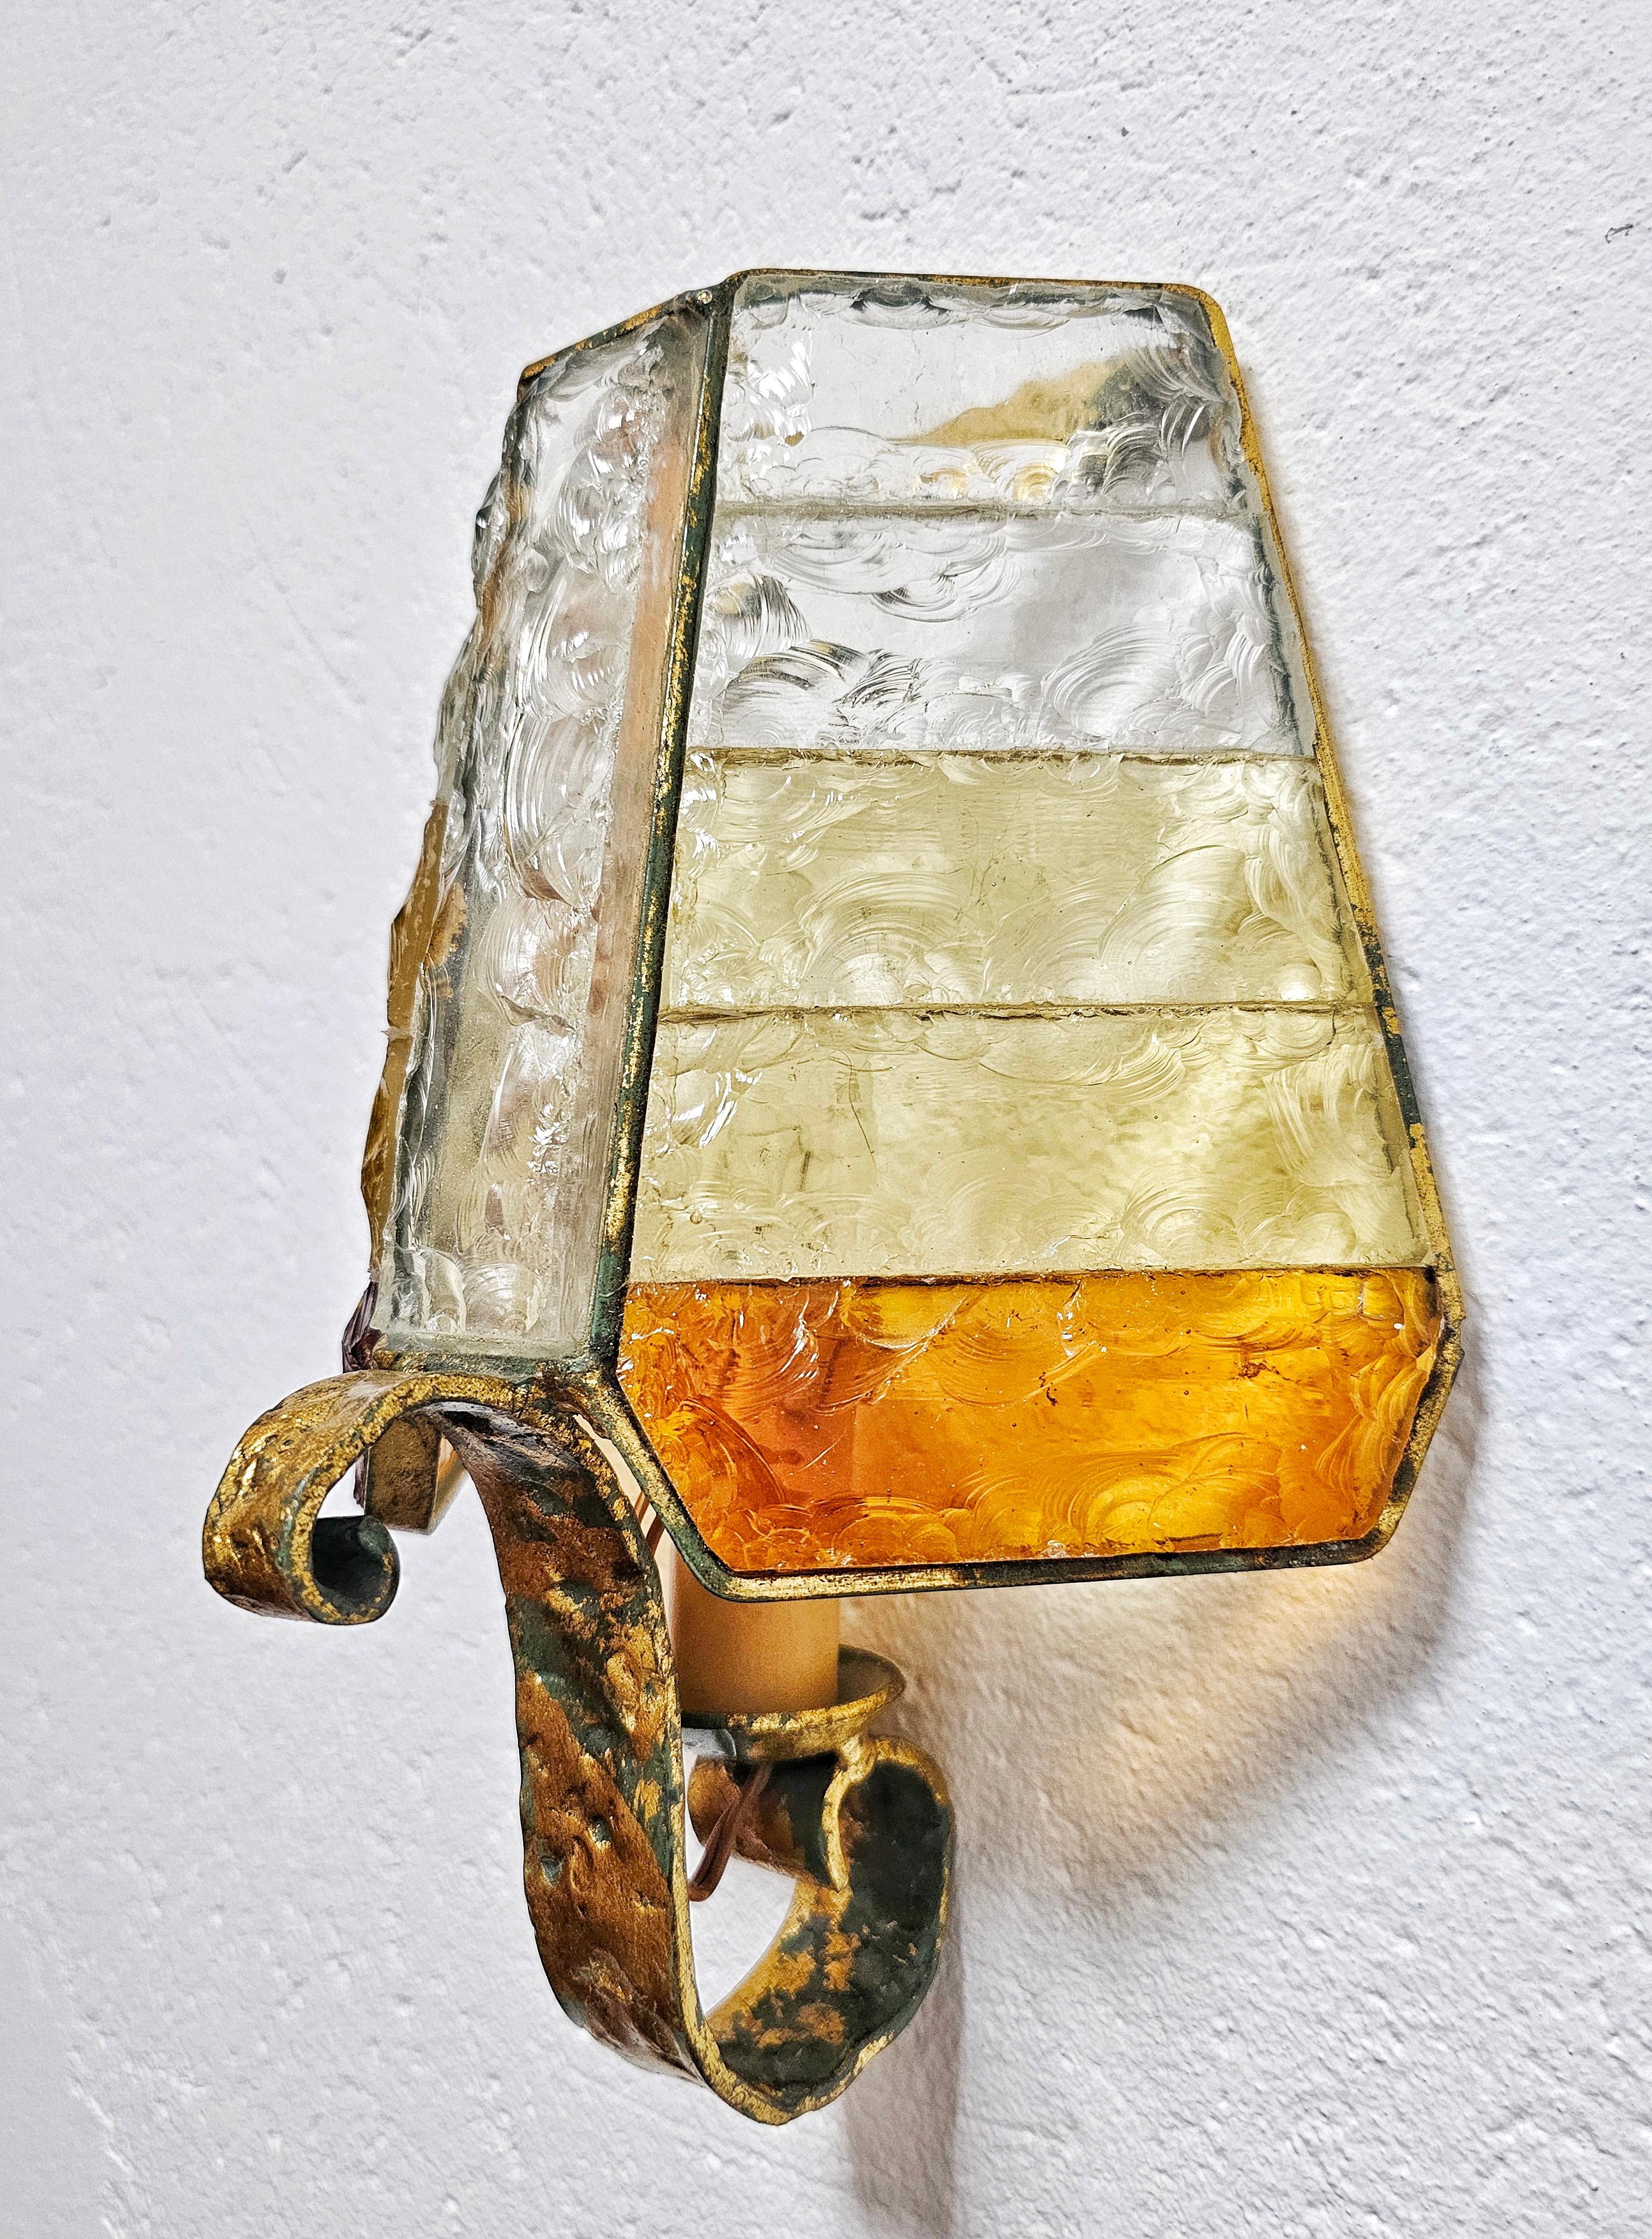 Pair of Brutalist Sconces in hammered glass by Longobard, Italy 1970s For Sale 1